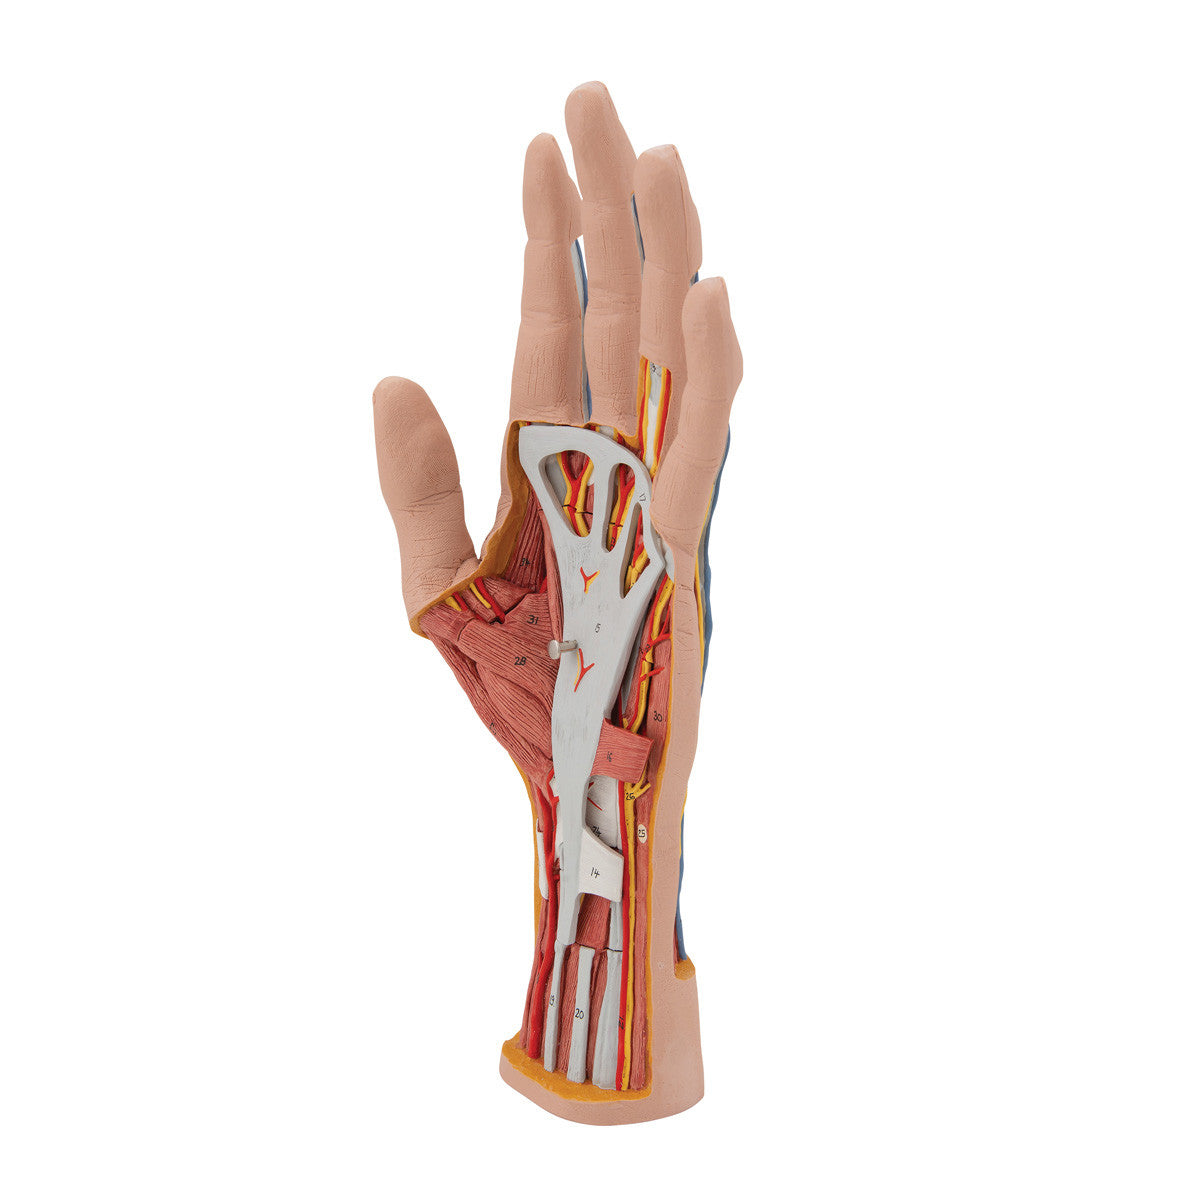 m18_06_1200_1200_life-size-hand-model-with-muscles-tendons-ligaments-nerves-arteries-3-part-3b-smart-anatomy__33478.1589752889.1280.1280.jpg